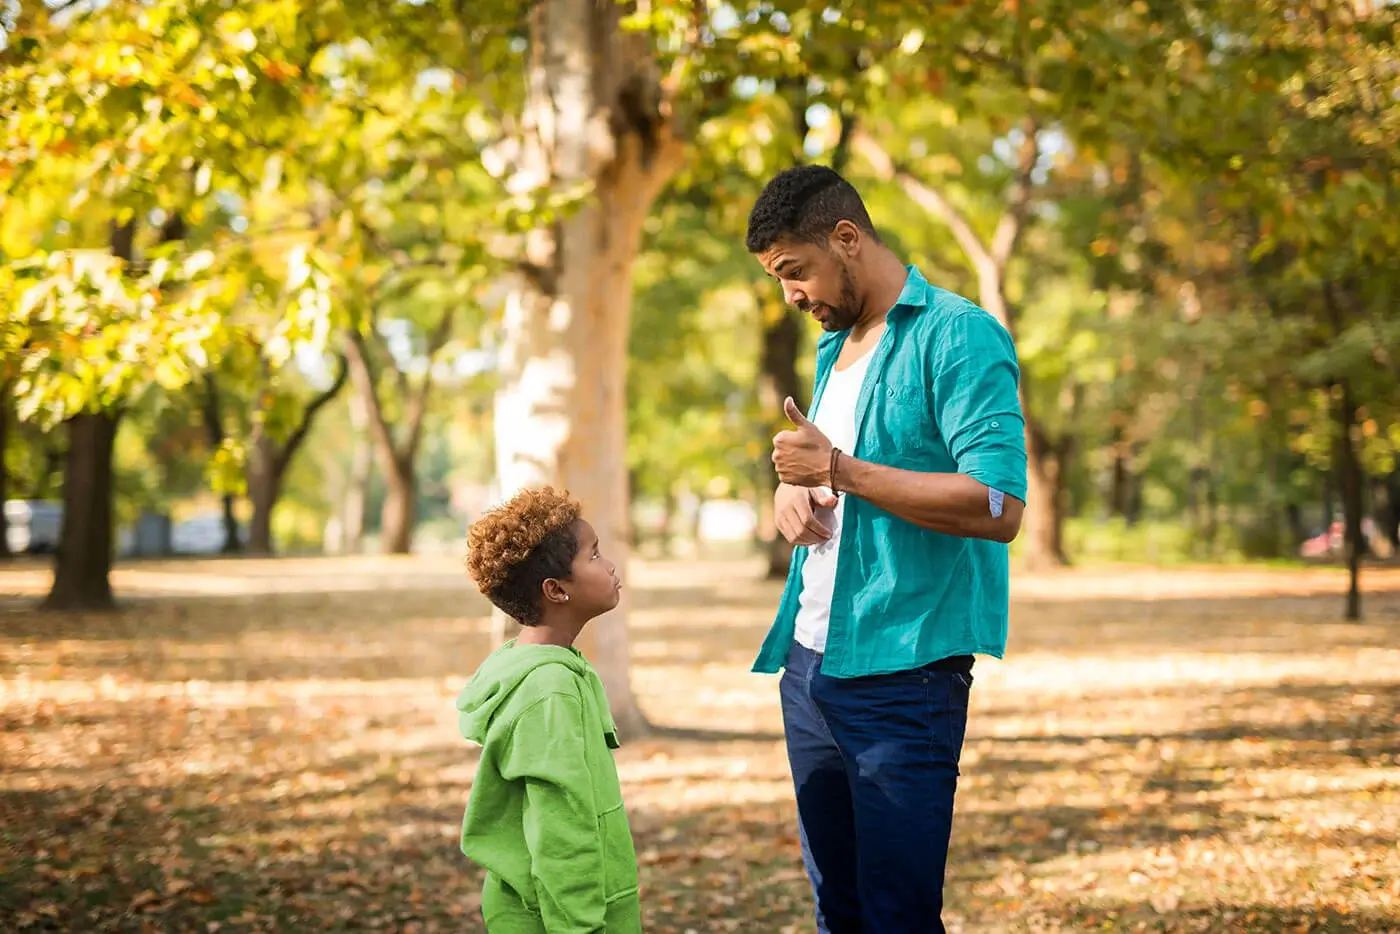 A man having a serious conversation with a young boy.